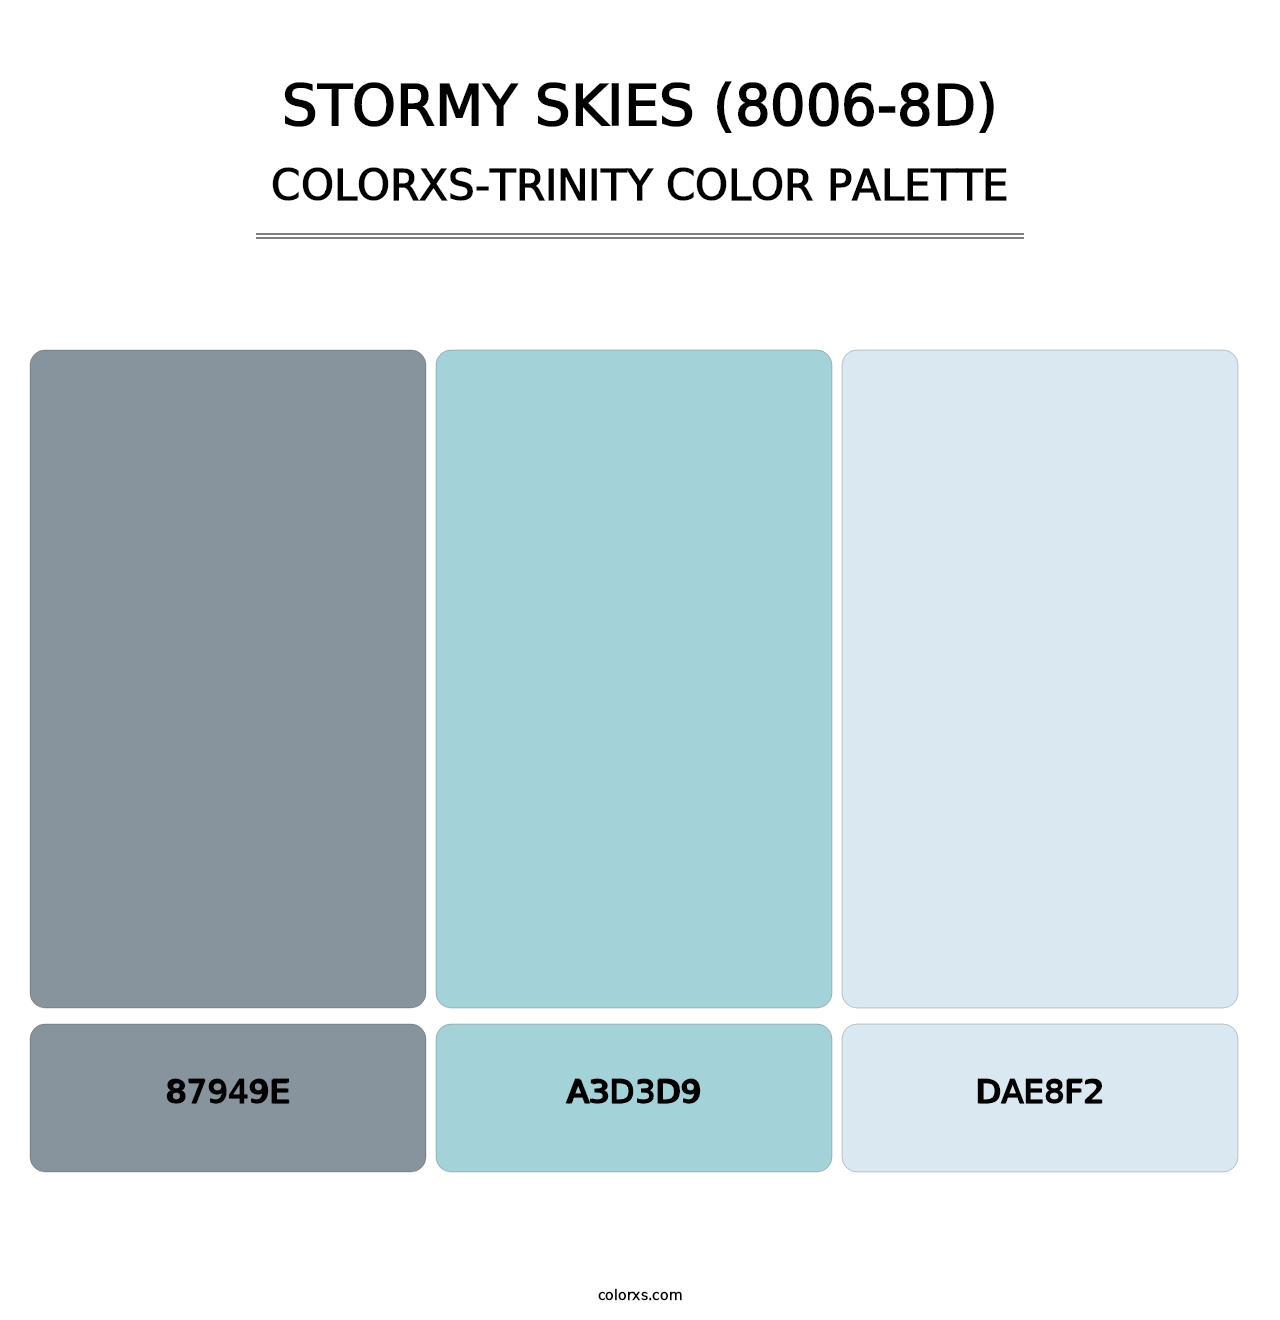 Stormy Skies (8006-8D) - Colorxs Trinity Palette